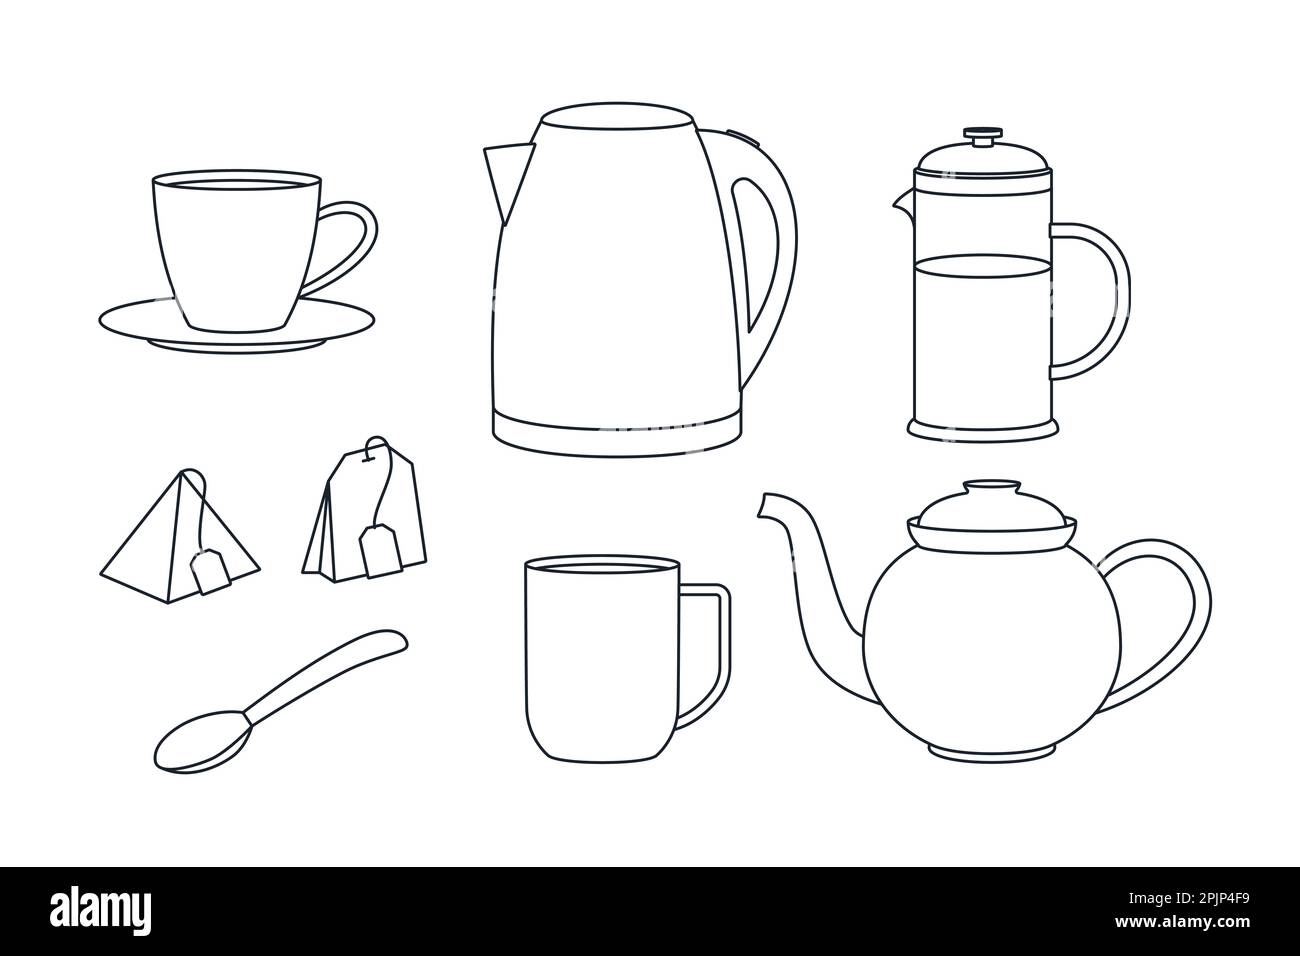 Set of appliances for tea brewing and drinking. Kettle, brewer, teapot, teaspoon and cup. Empty and full french press. Outline vector illustration Stock Vector